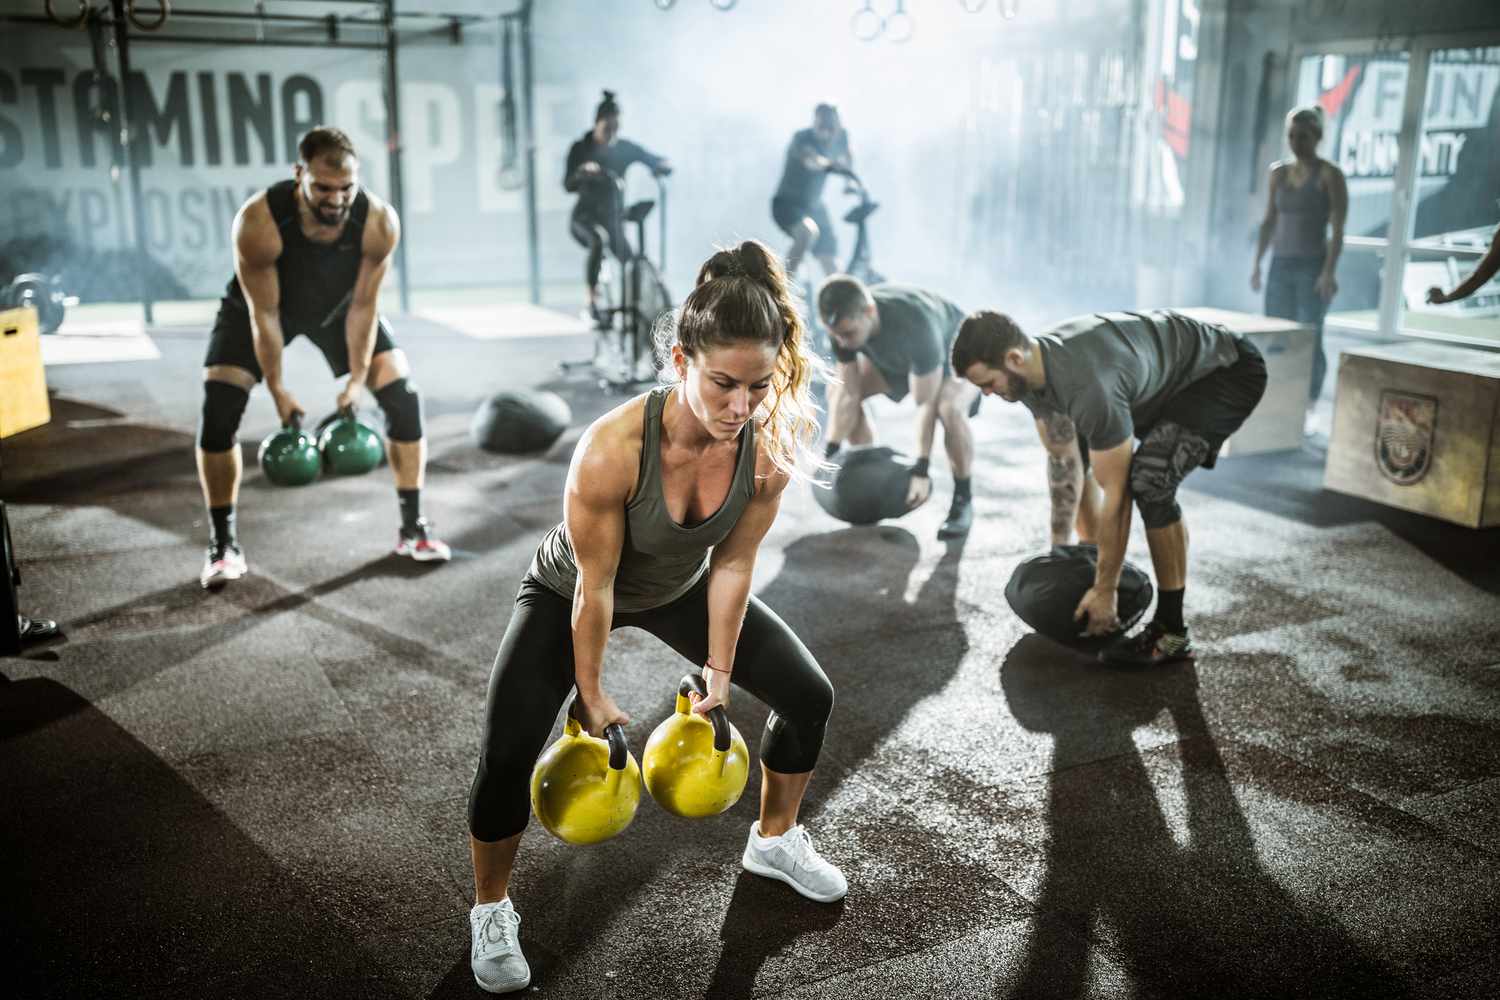 People performing workouts in gym group setting with kettlebells